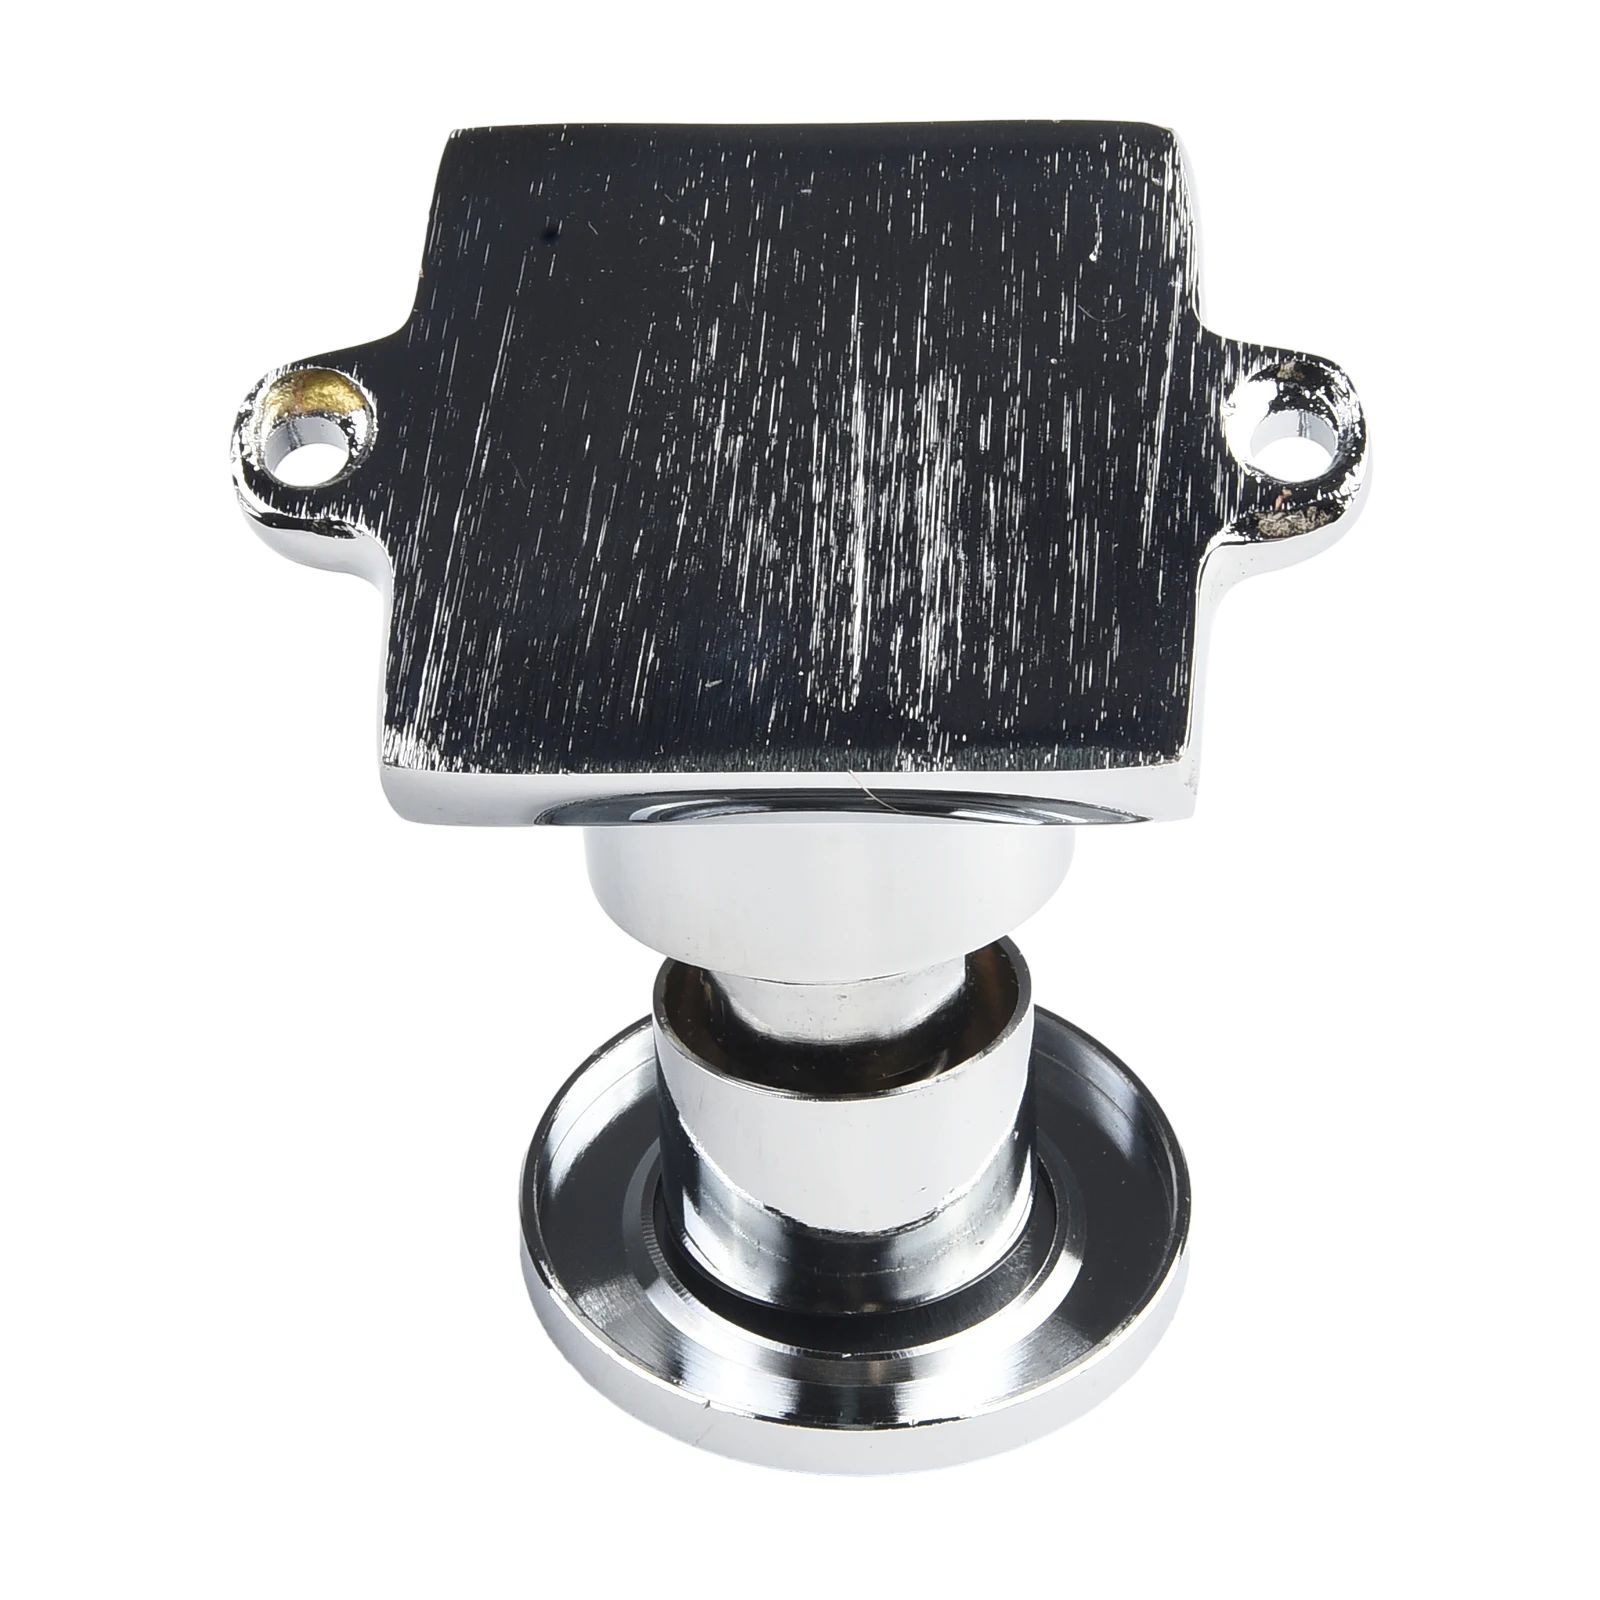 

1PCS Foot Pedal Valve Copper Floor Foot Pedal Control Switch Tap Valve Faucet Cold Water Basin Single For Hospitals Schools